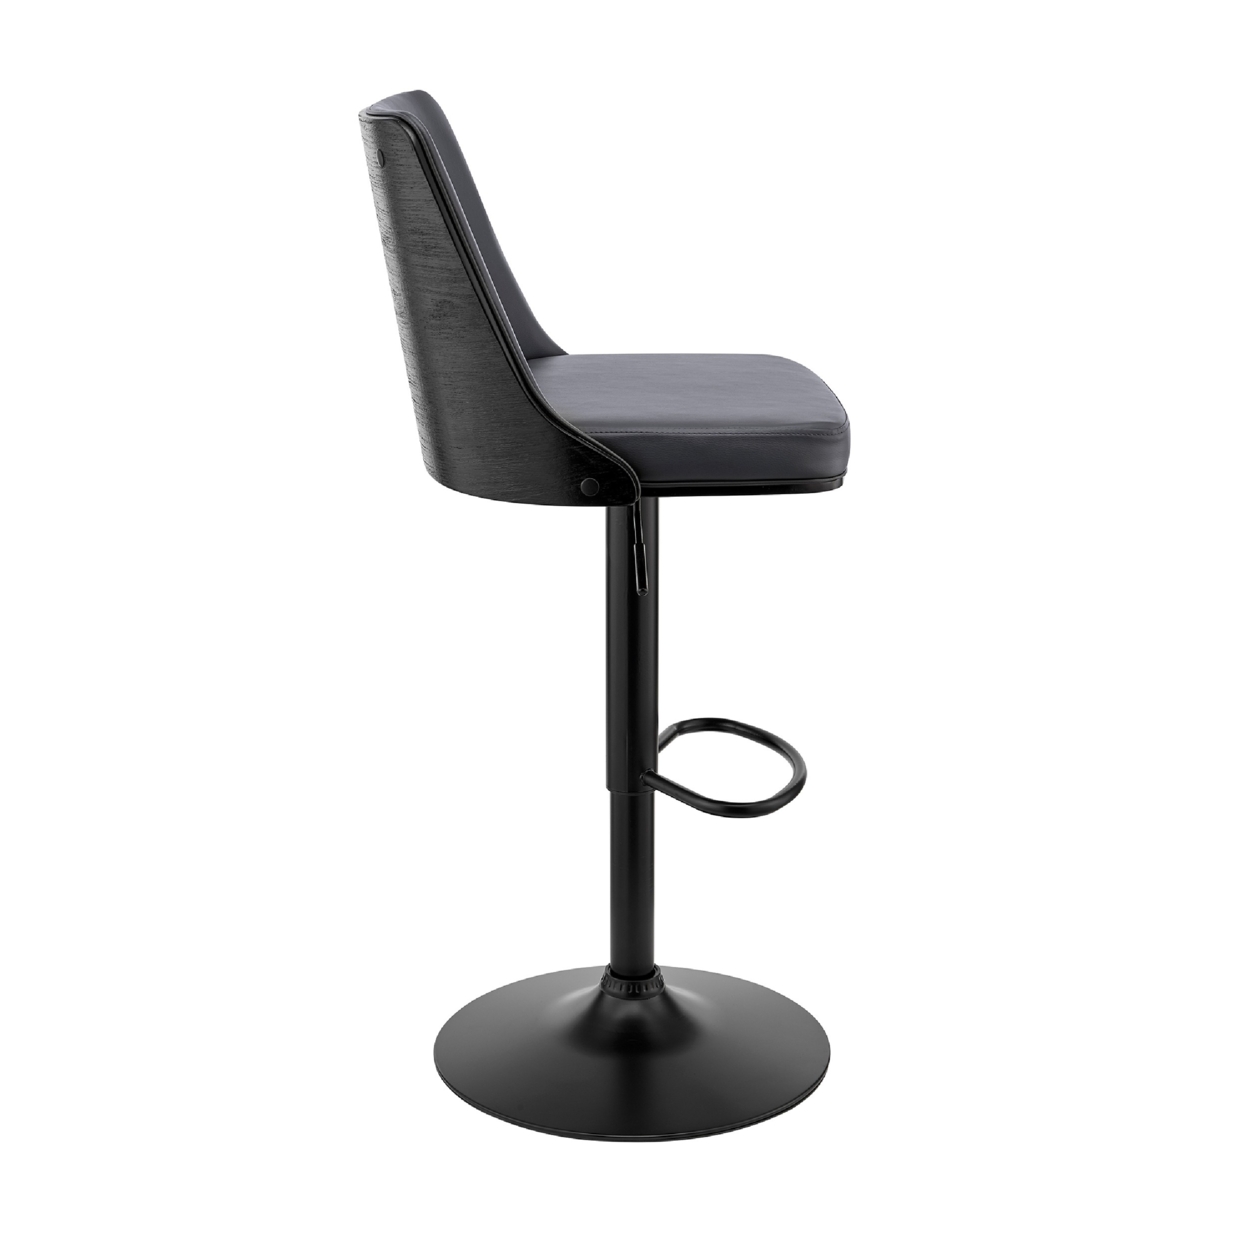 Adjustable Barstool With Faux Leather And Wooden Backing, Black- Saltoro Sherpi